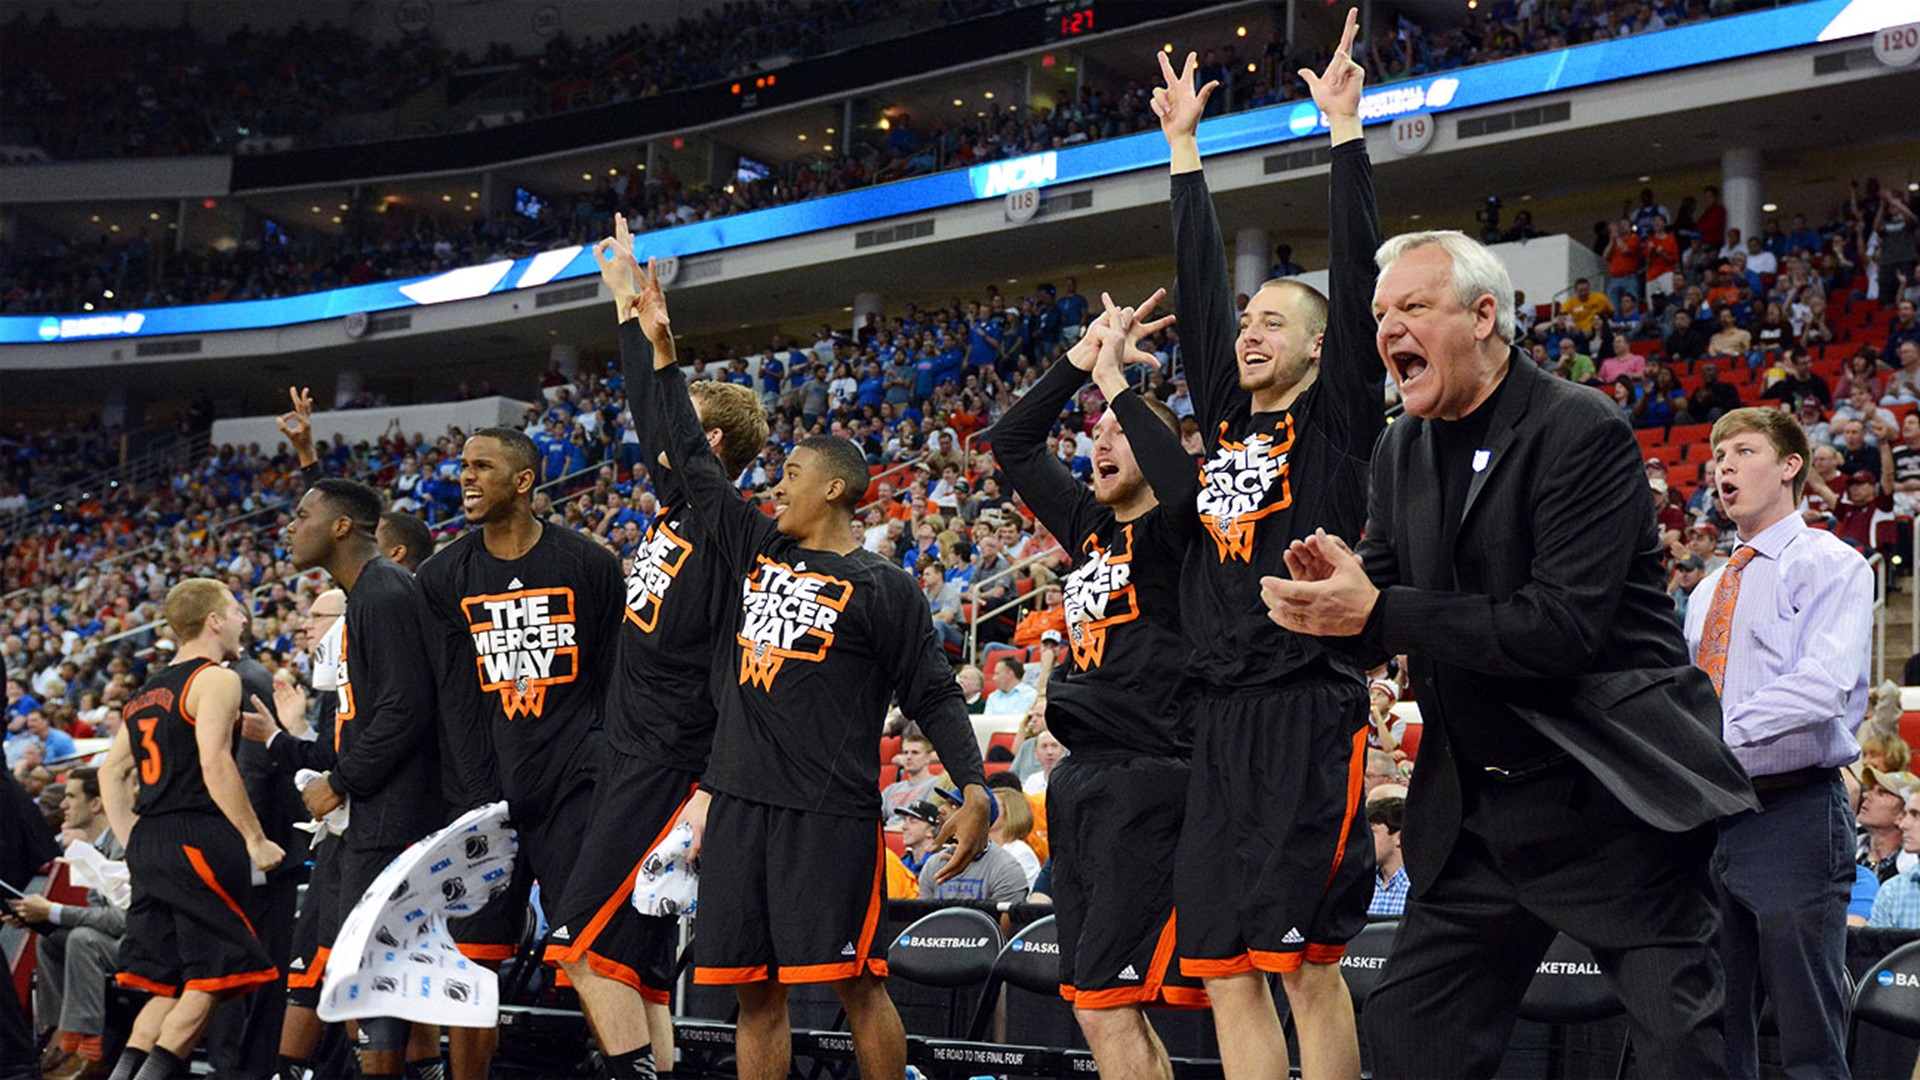 Mercer beating Duke a decade ago is one of the biggest Cinderella stories in college basketball history. In the 10 years since the player's bonds remain strong.